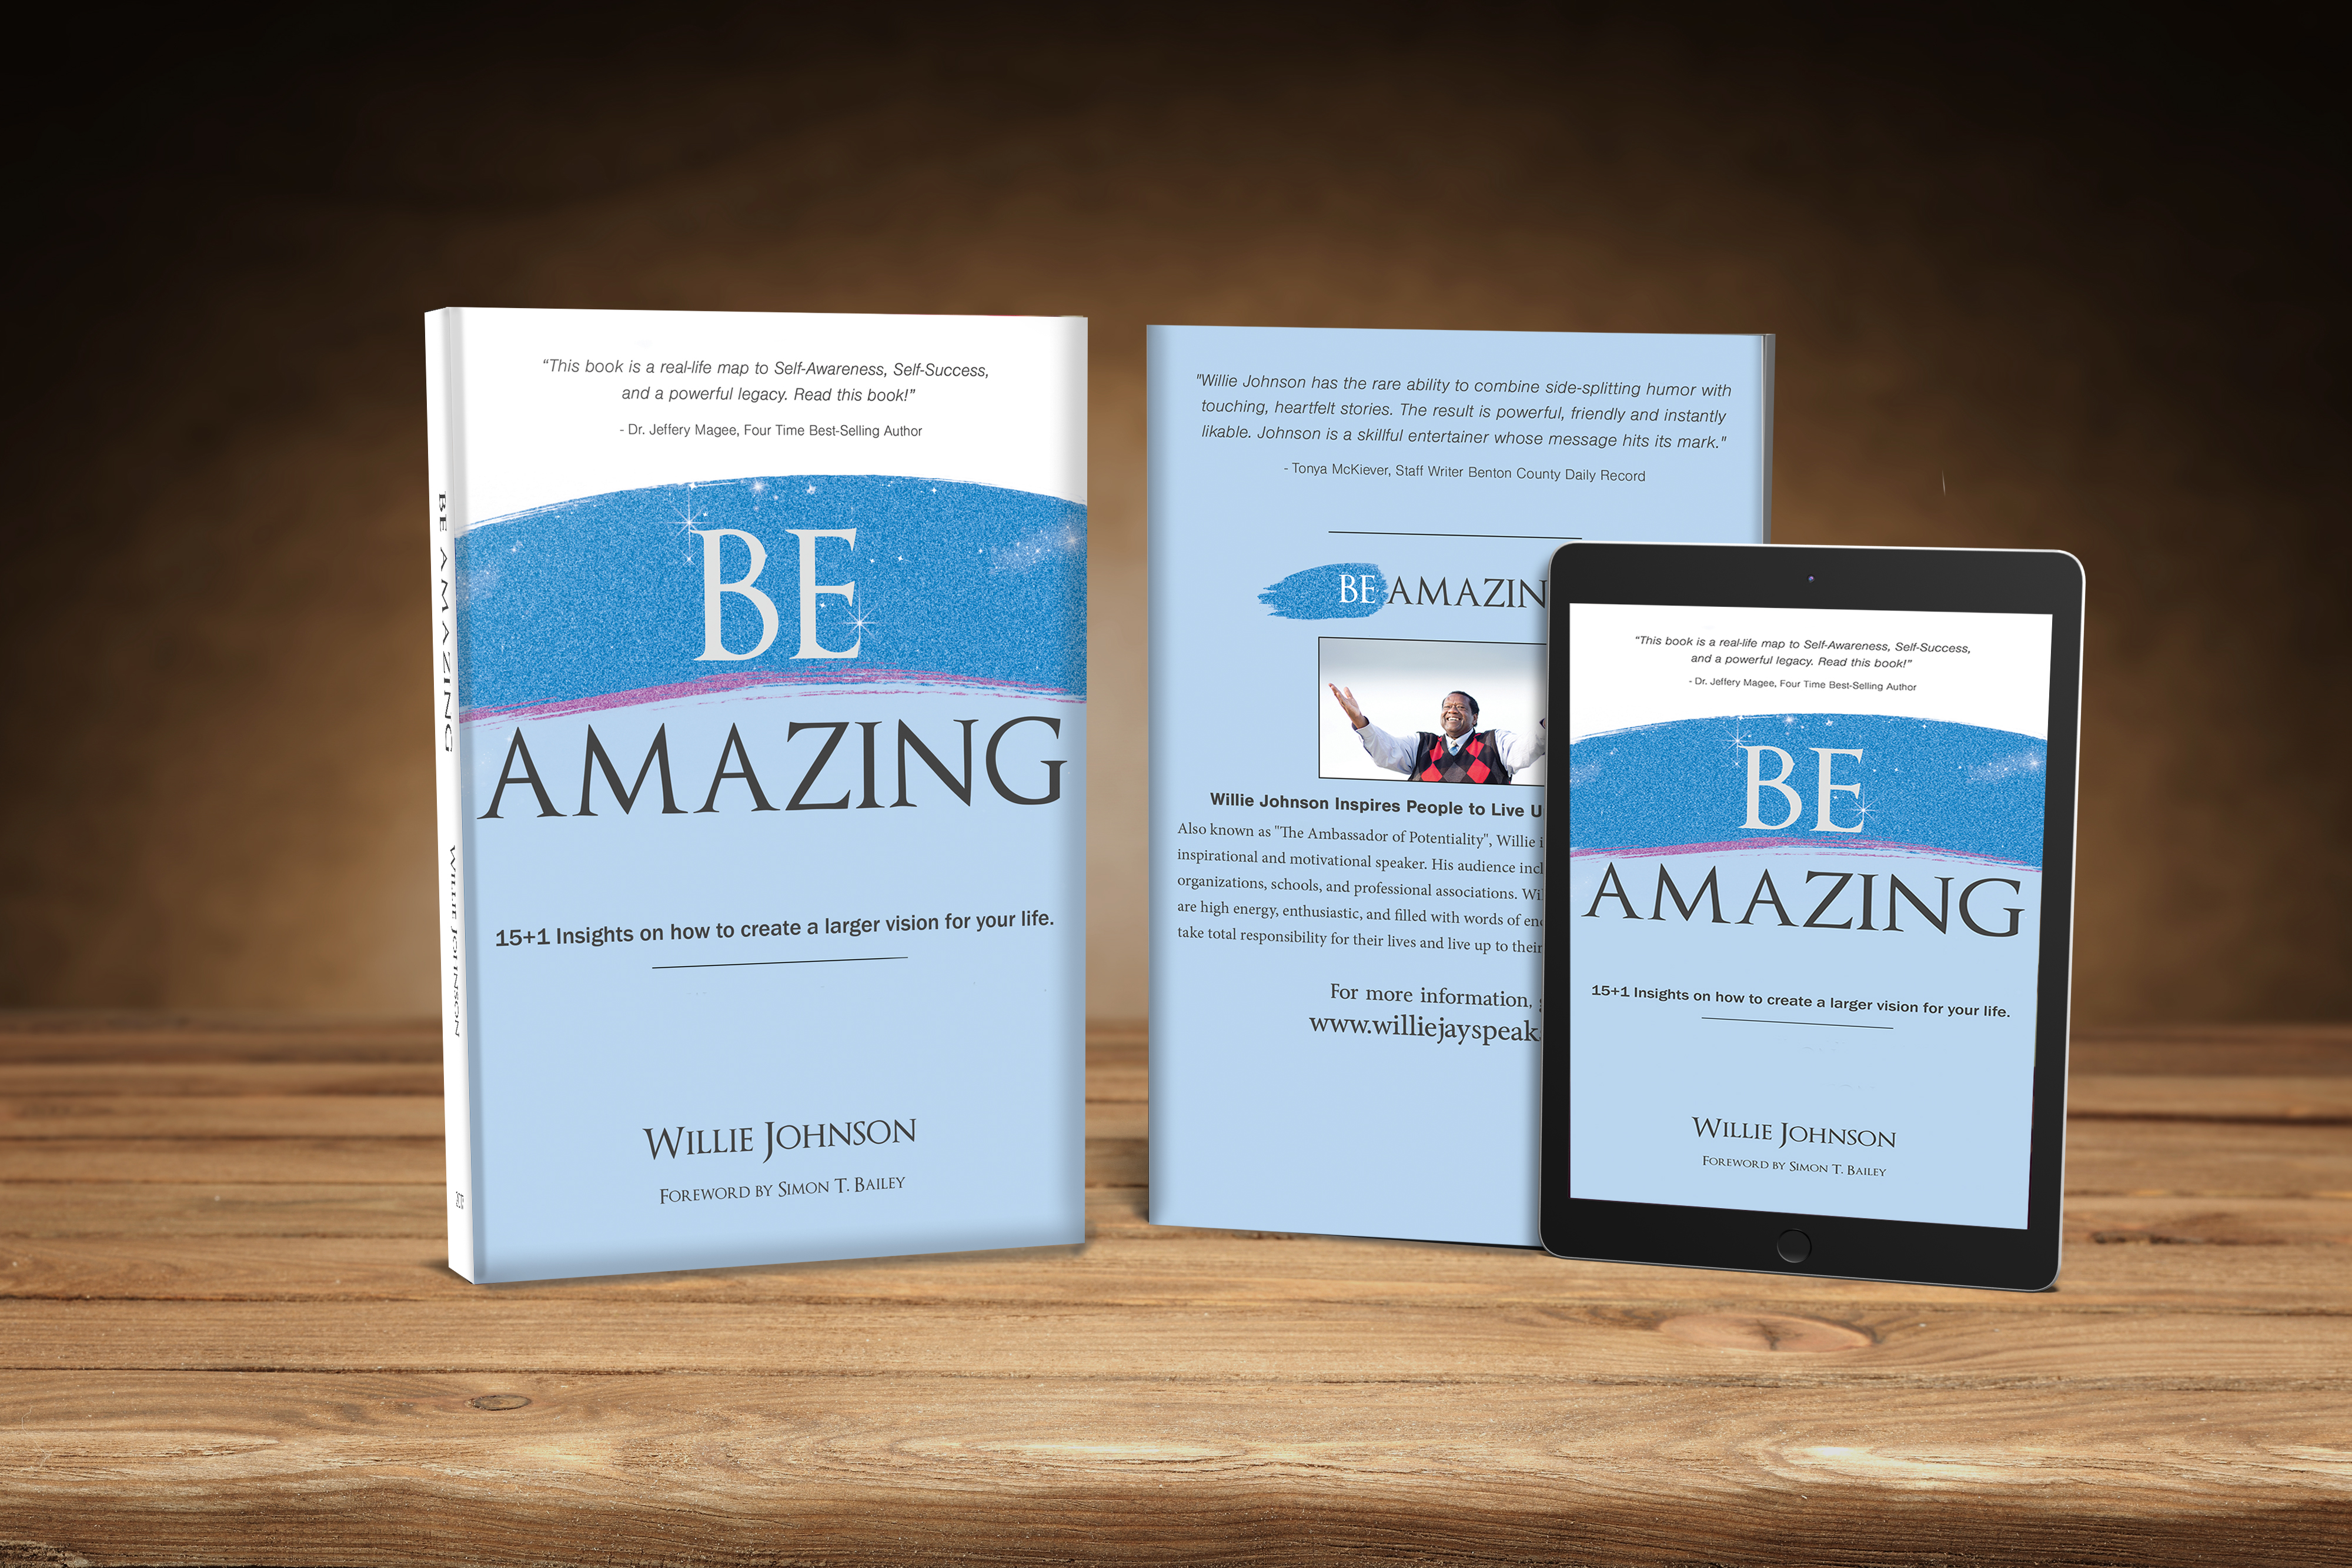 Willie Johnson has released his second book called Be Amazing!